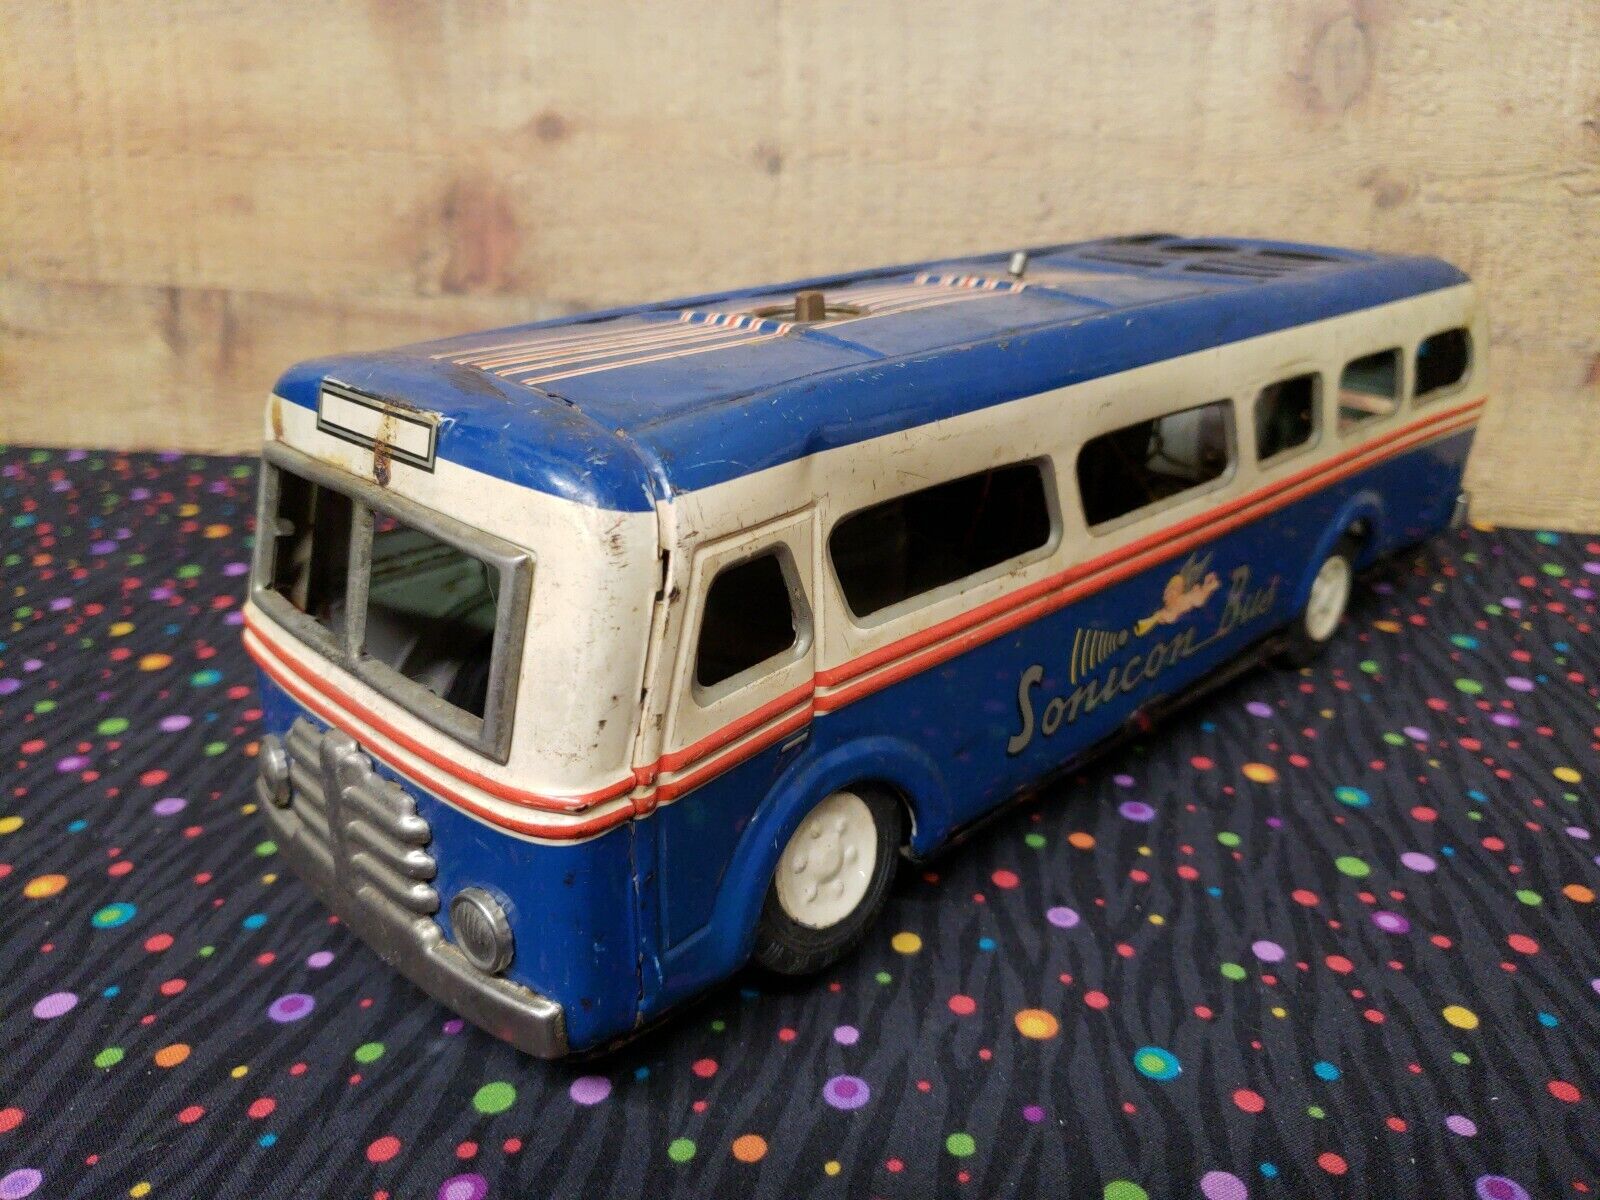 Vintage Toy Made in Japan Sonicon Bus Old Collectible, Not Working, See details 